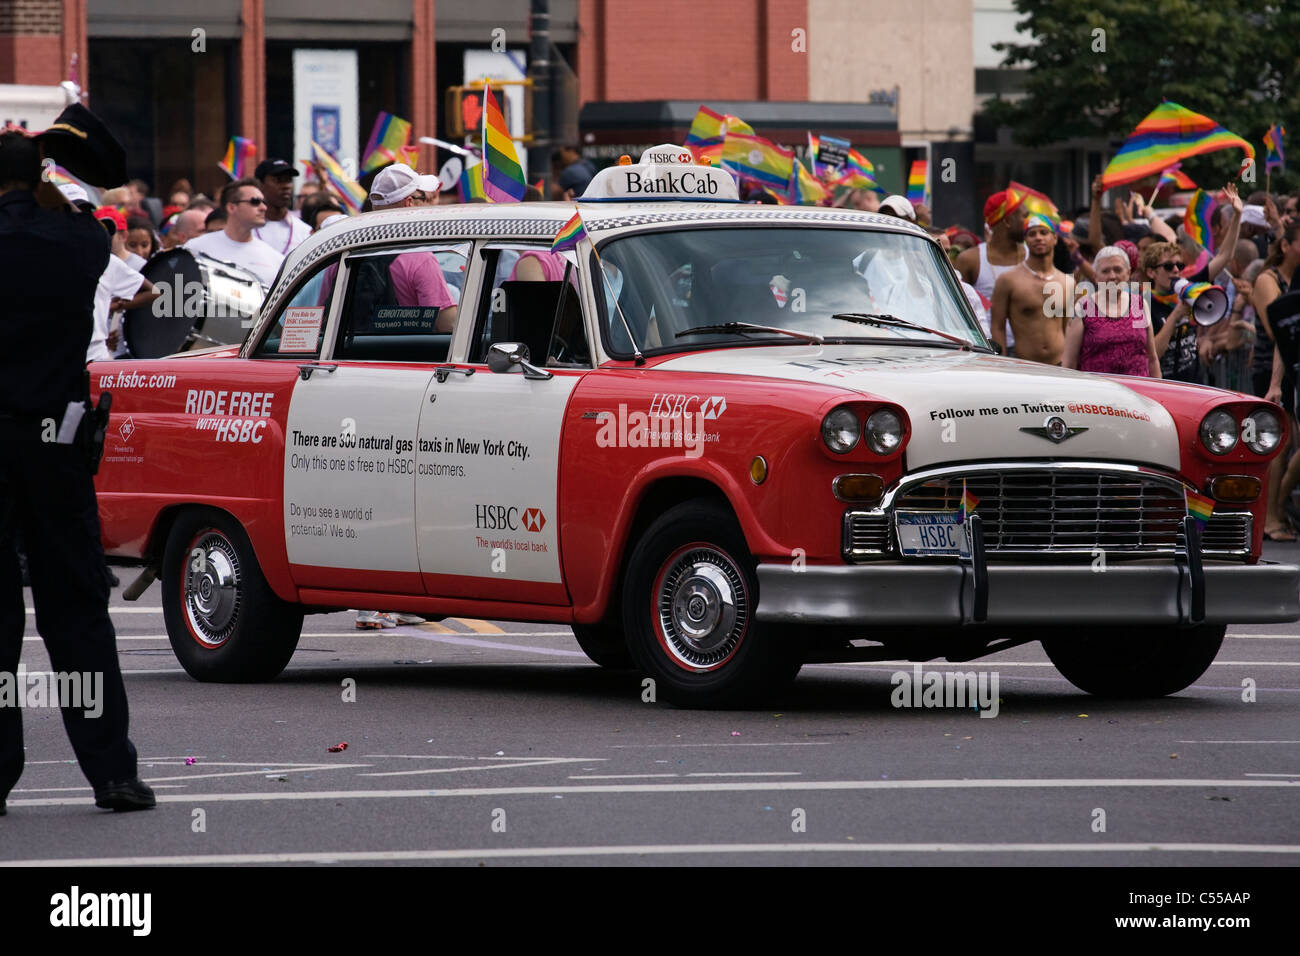 HSBC Bank's Natural Gas Powered Checker Cab in New York City during the Gay Pride Parade in Greenwich Village Stock Photo